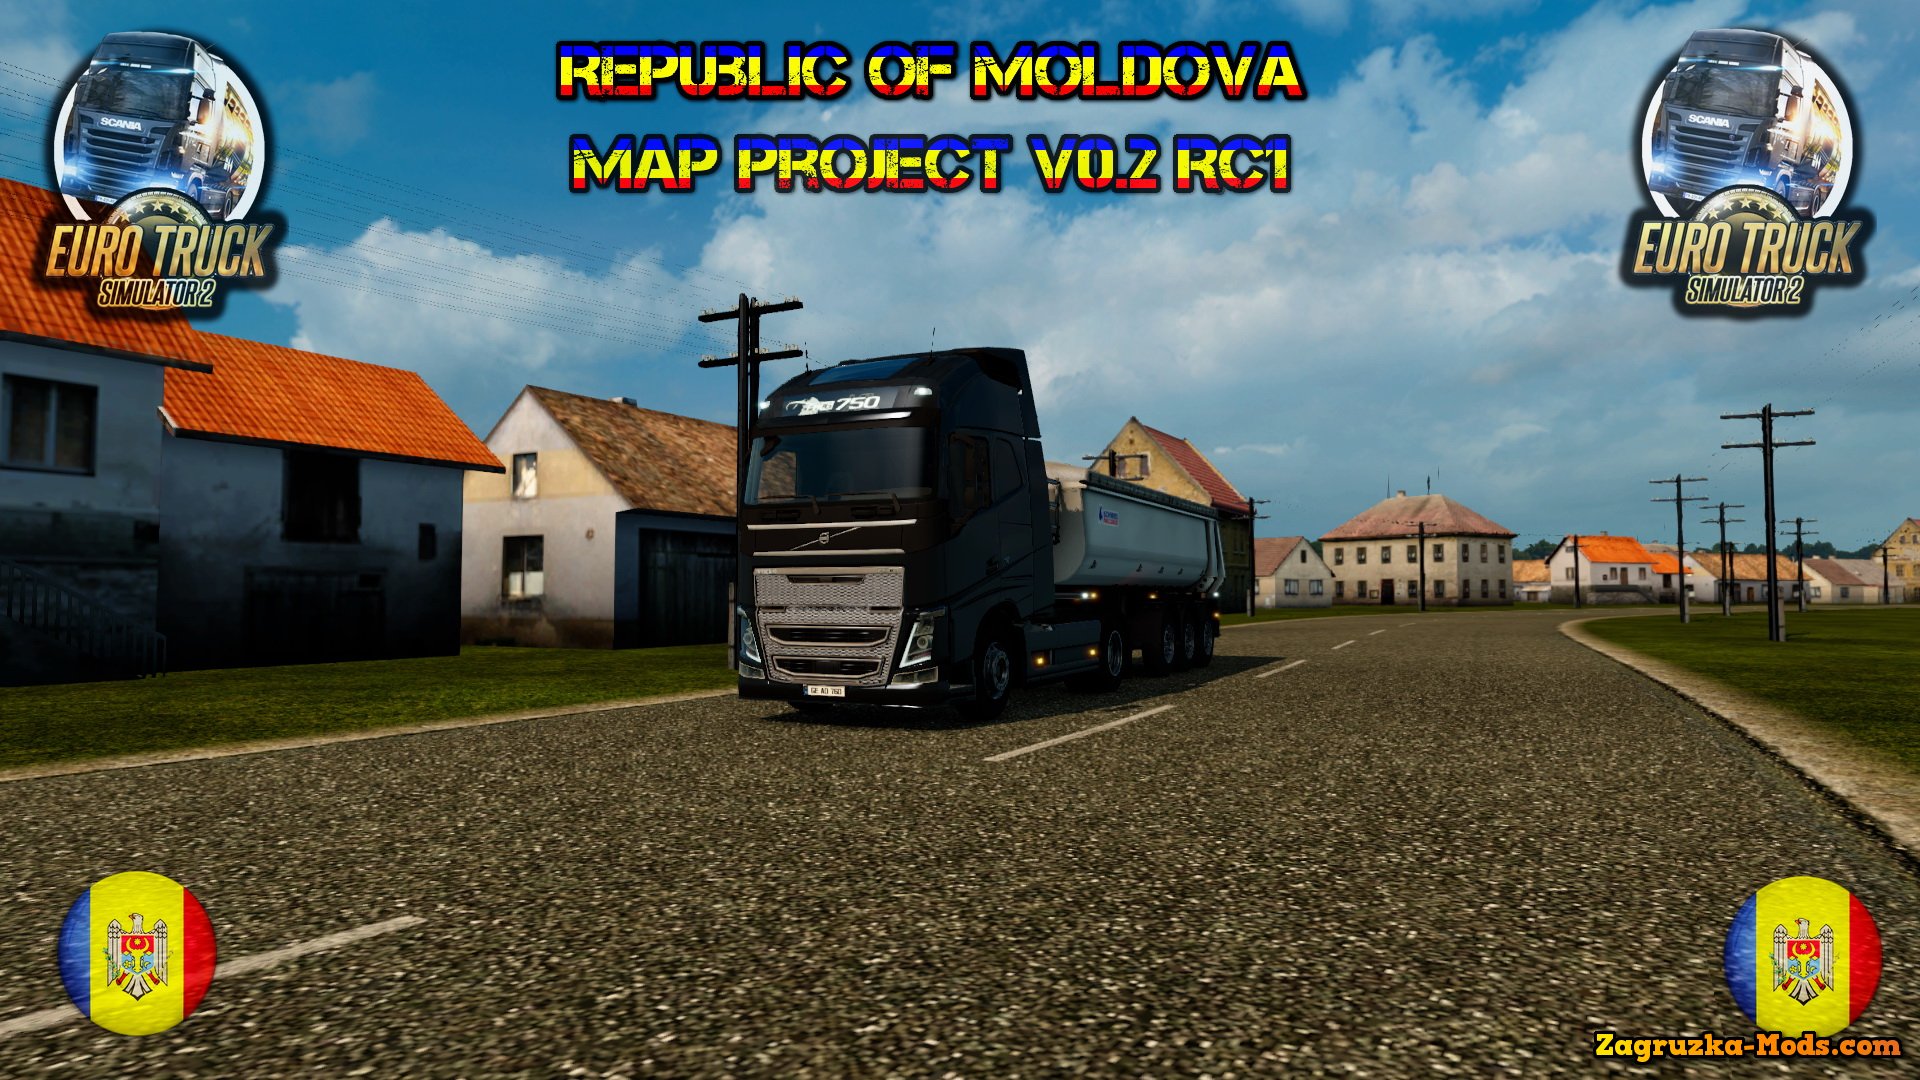 Republic of Moldova Map Project v0.2 RC1 for ETS 2